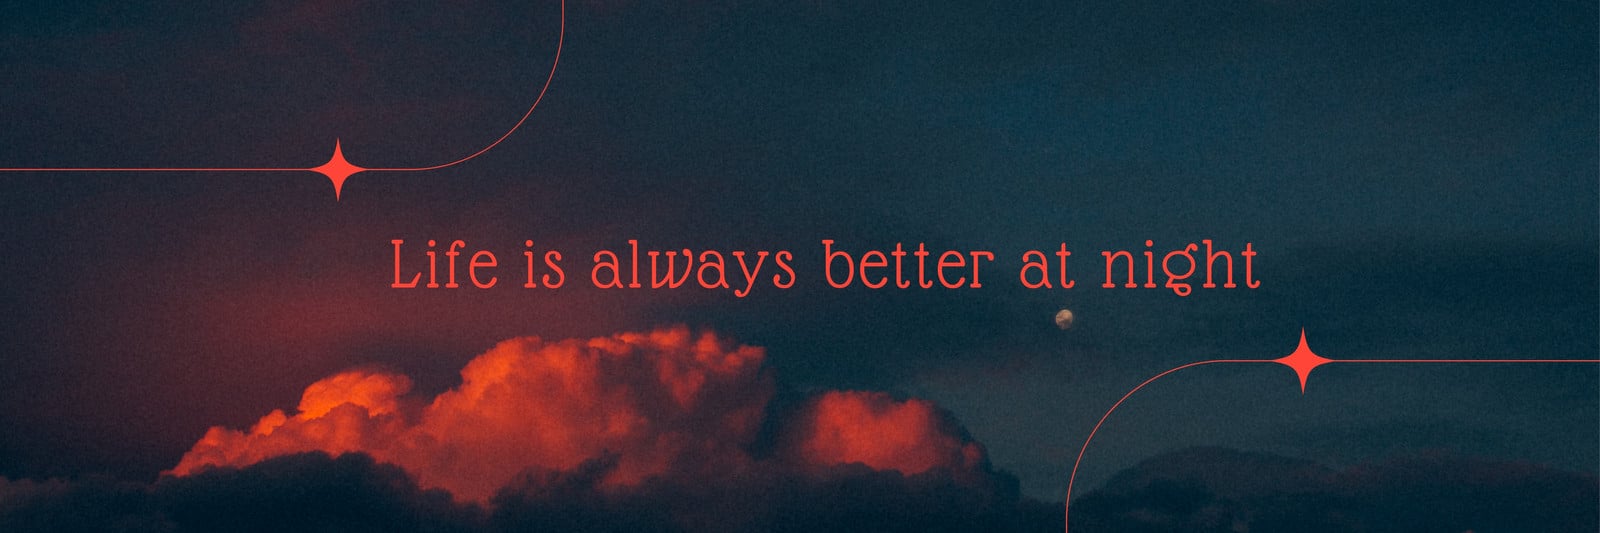 Red and Black Full Photo Night Sky Aesthetic Quote Twitter Header